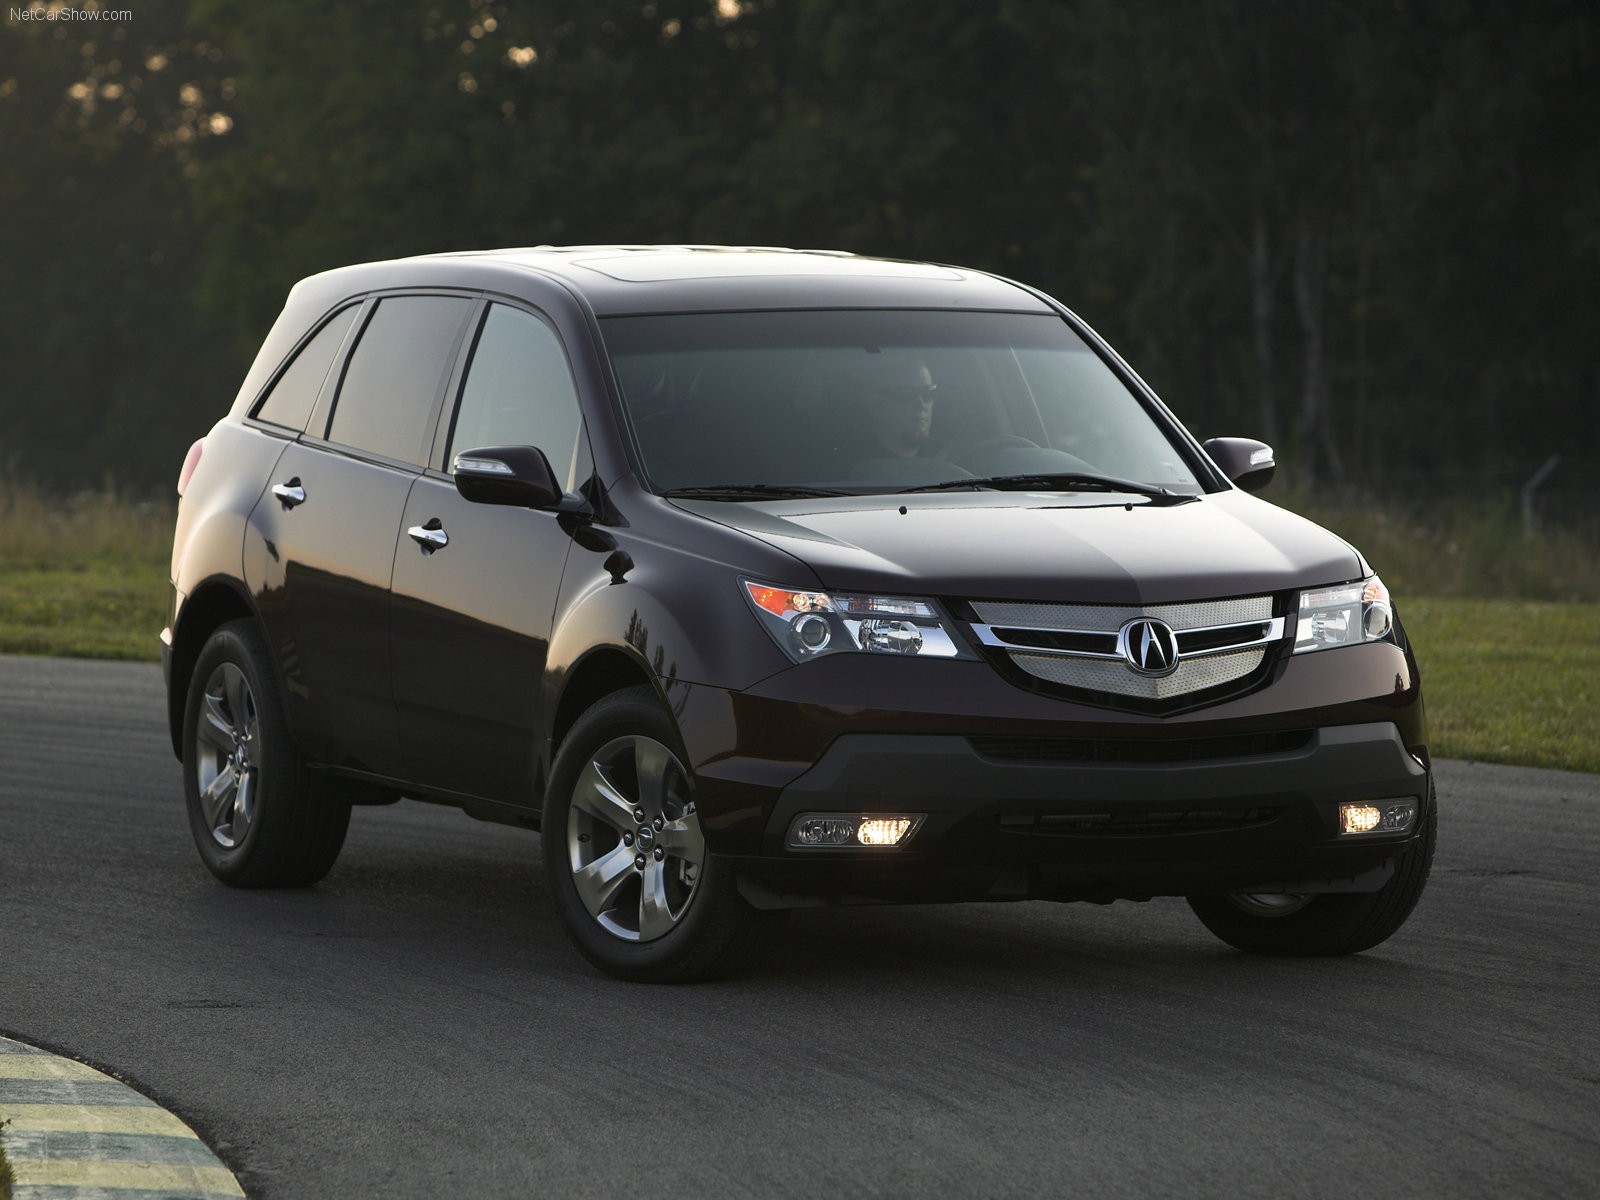 acura mdx Wallpapers hd A4